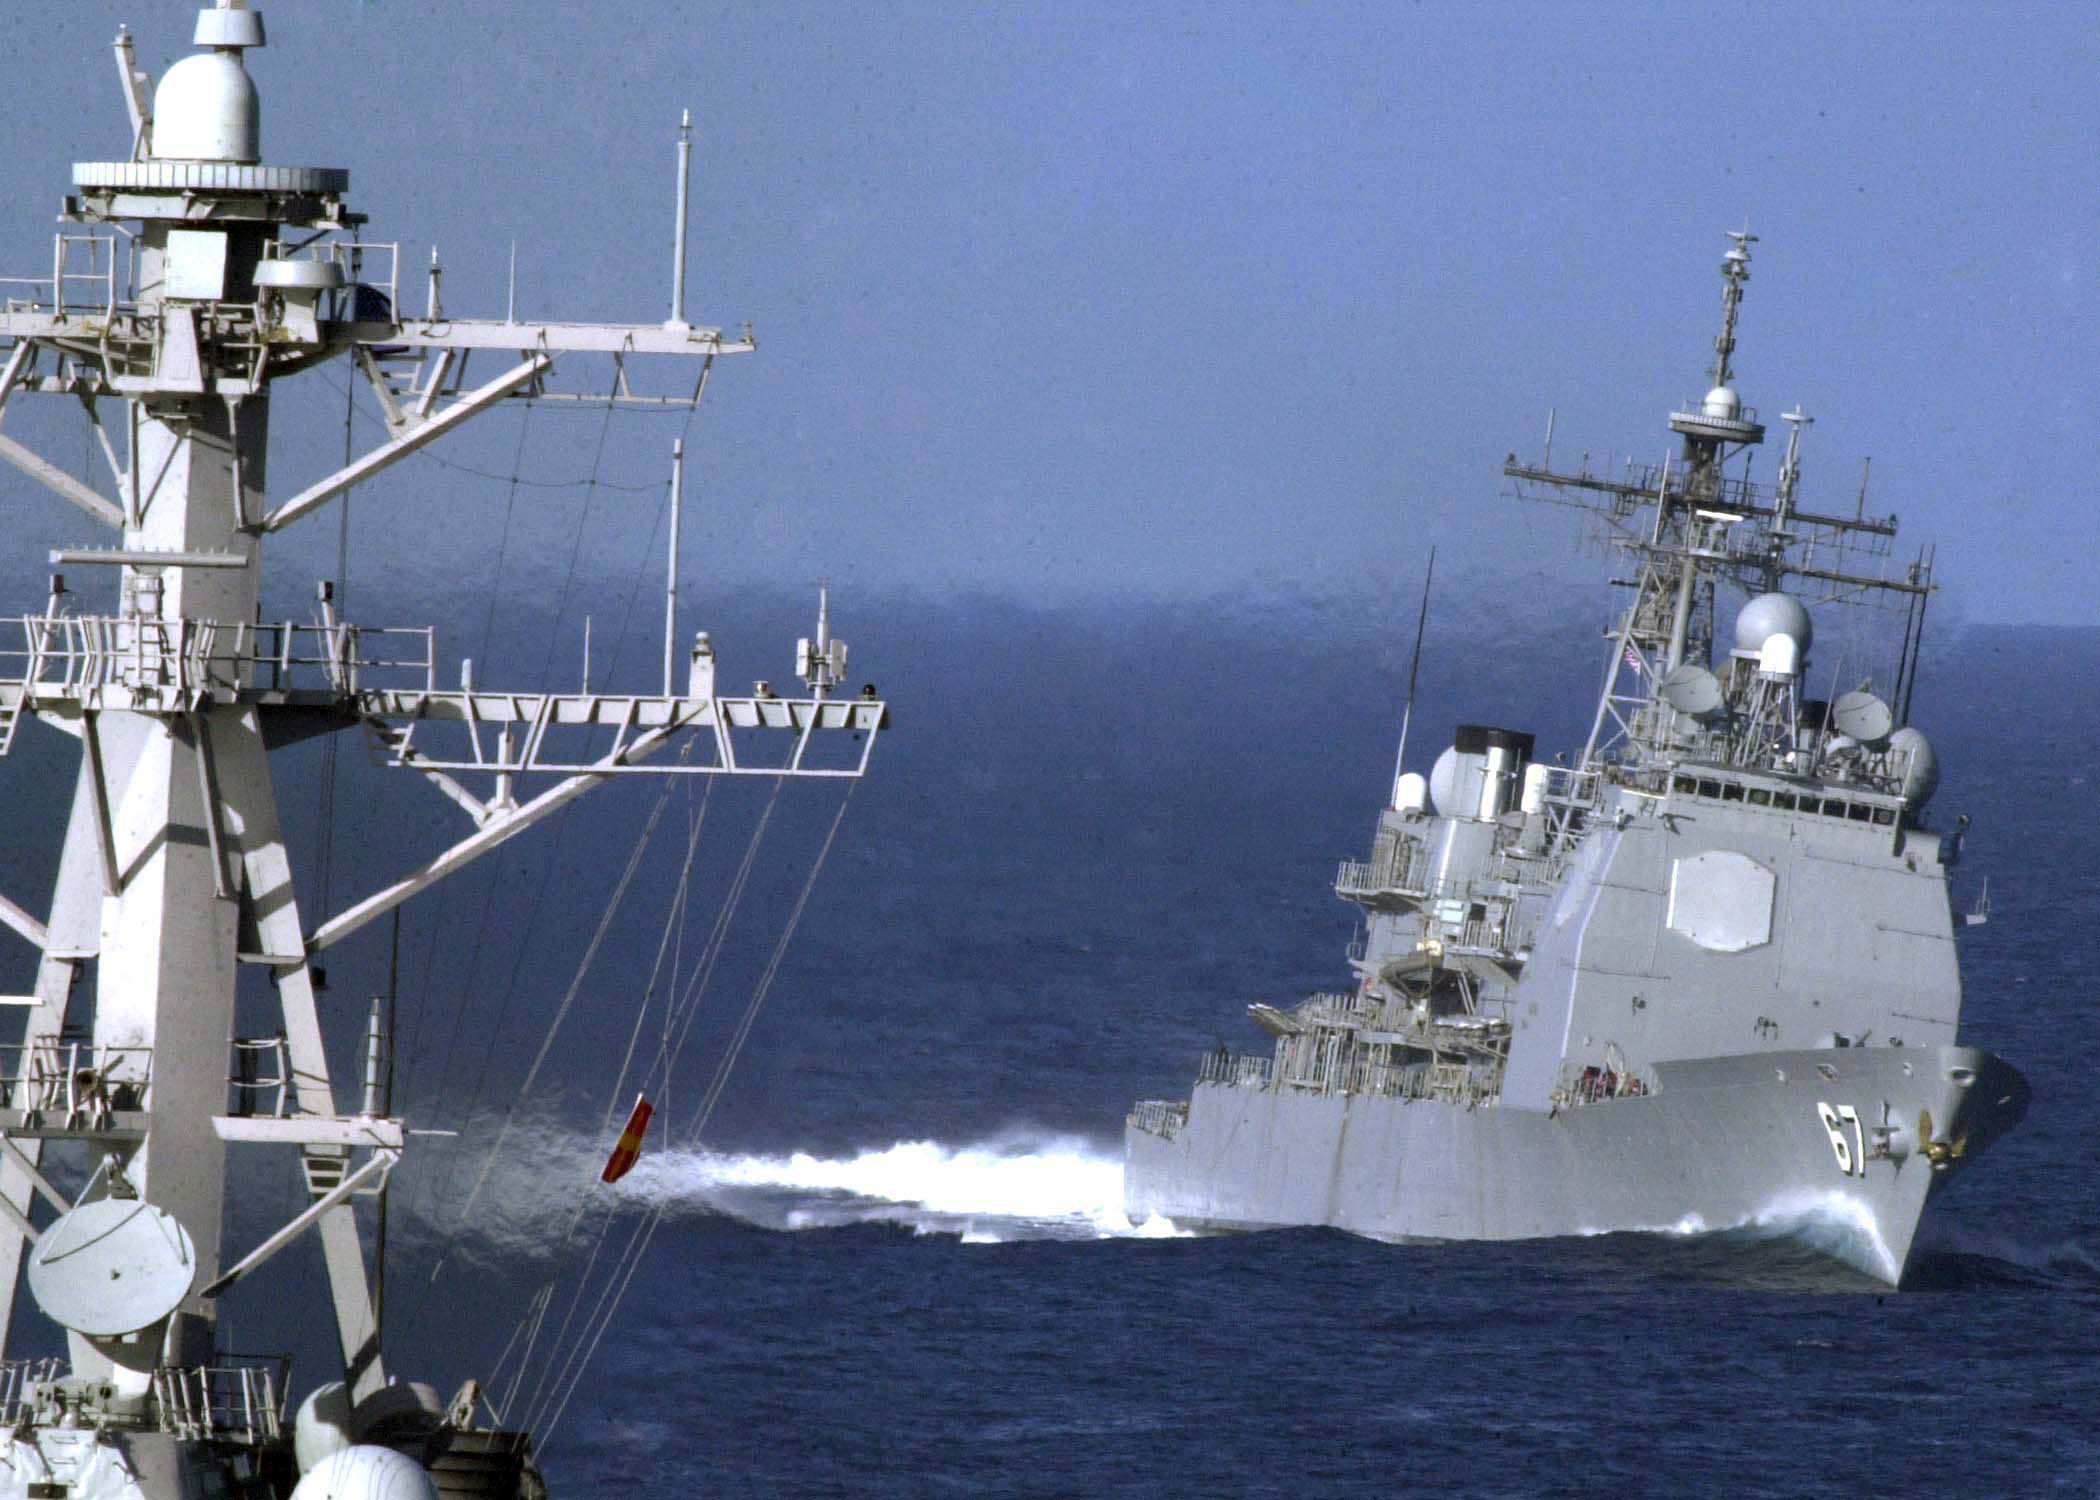 US_Navy_041110-N-9079D-012_The_Ticonderoga-class_guided_missile_cruiser_USS_Shiloh_(CG_67)_approaches_the_guided_missile_destroyer_USS_Shoup_(DDG_86)_while_preparing_for_a_replenishment_at_sea_(RAS)_with_the_aircraft_carrier_US.jpg